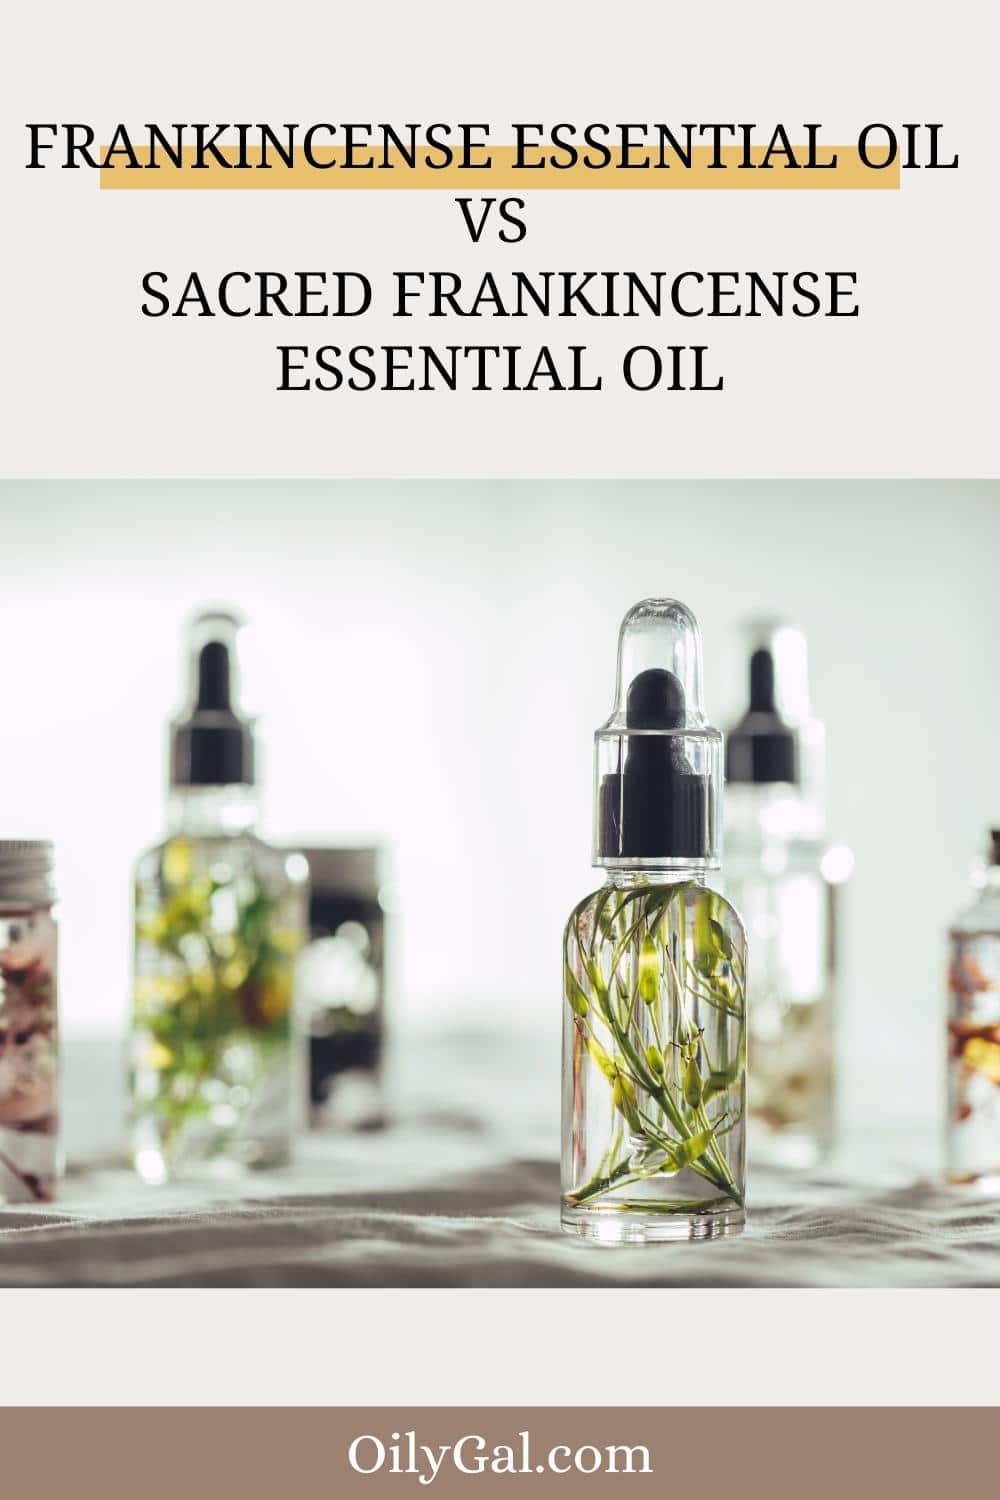 Is Sacred Frankincense the Same as Frankincense? Frankincense Essential oil vs Sacred Frankincense essential oil